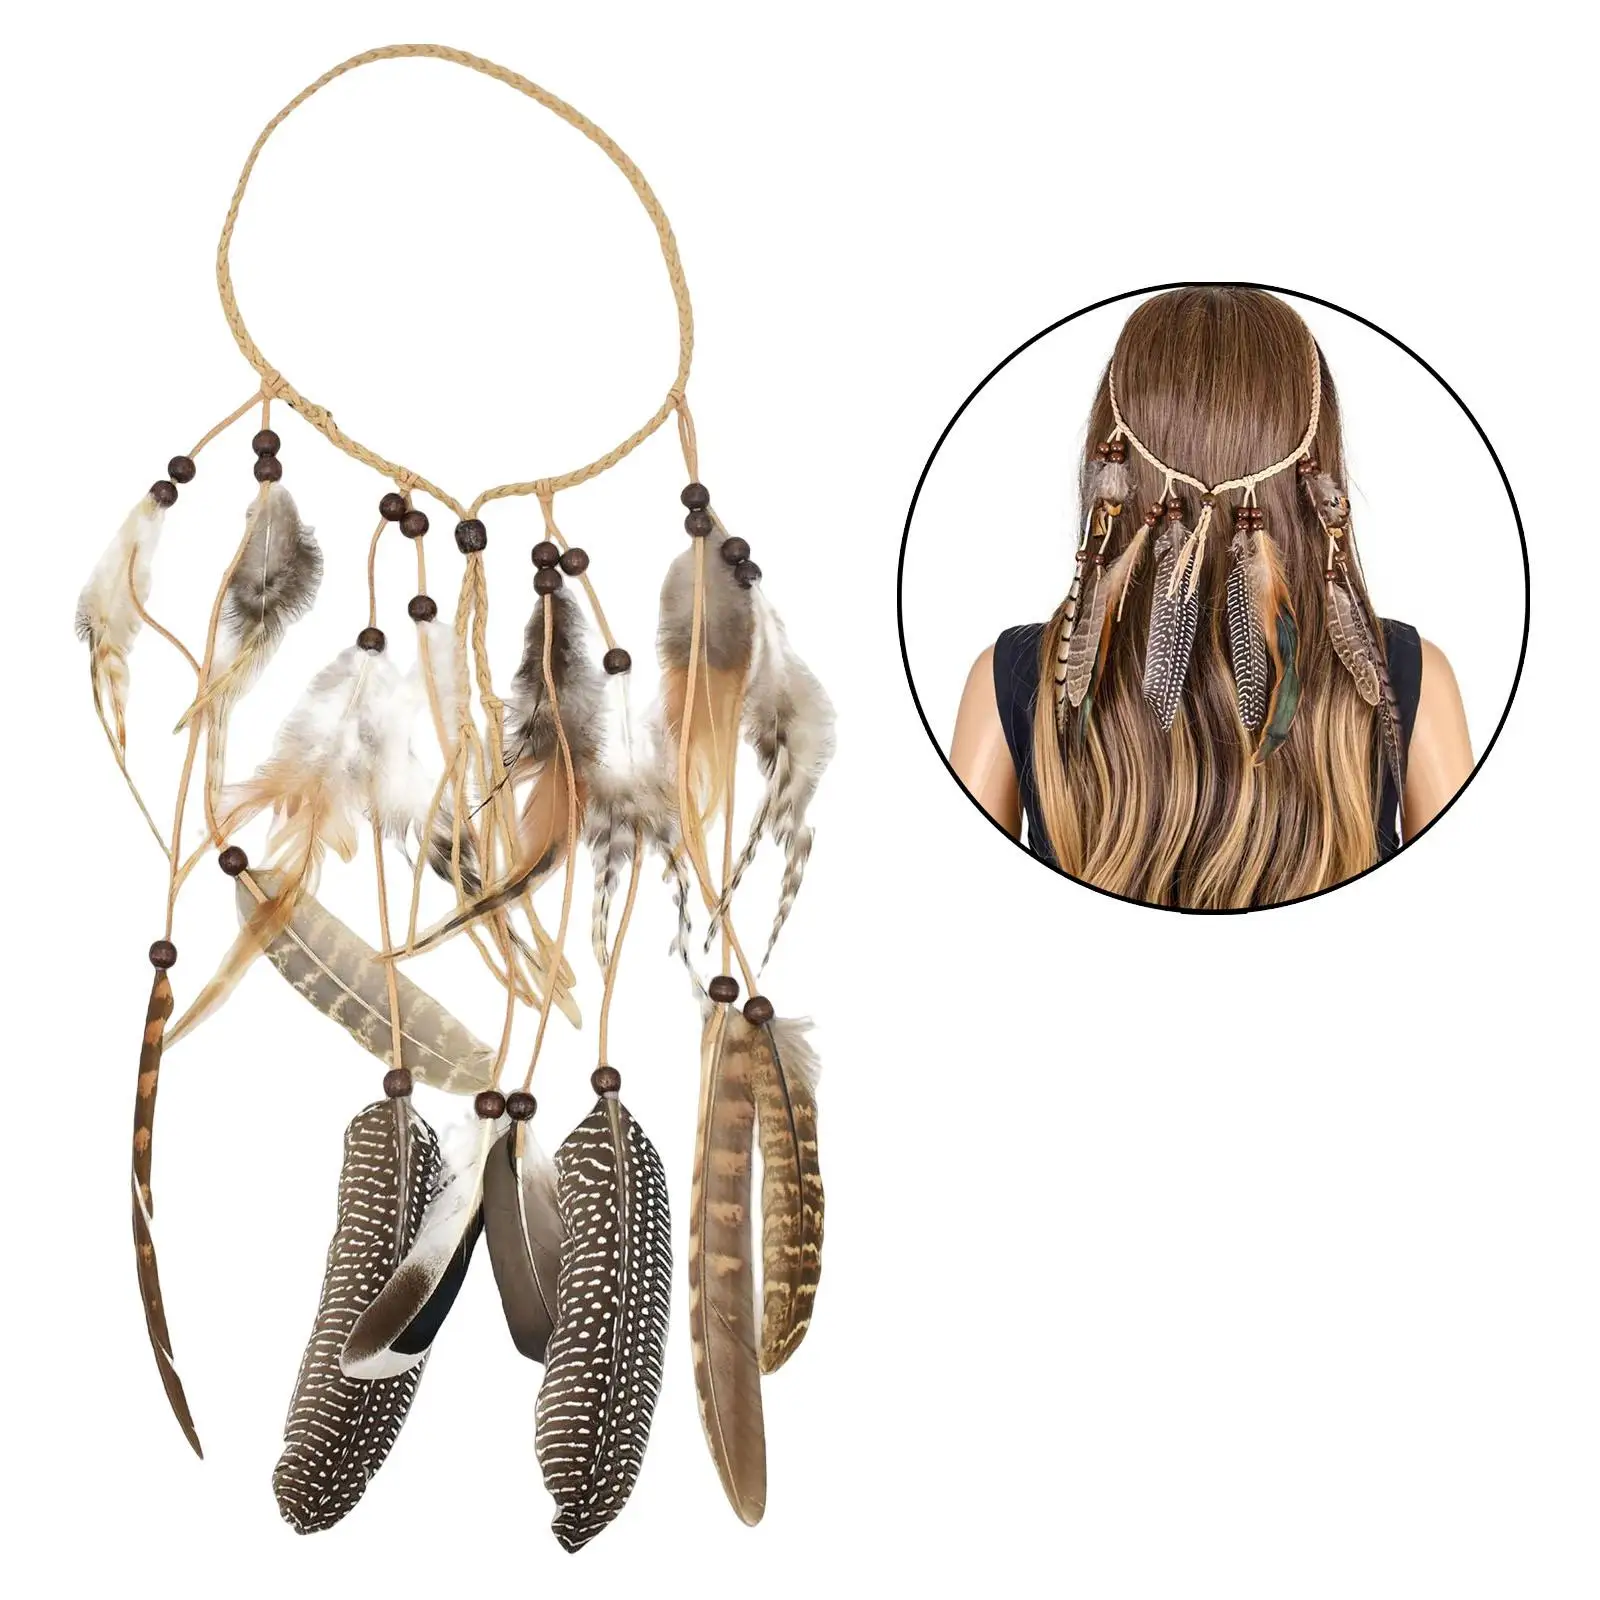 Boho Indian Feather Headband Hair Accessories Hairband for Photo Props Party Festival